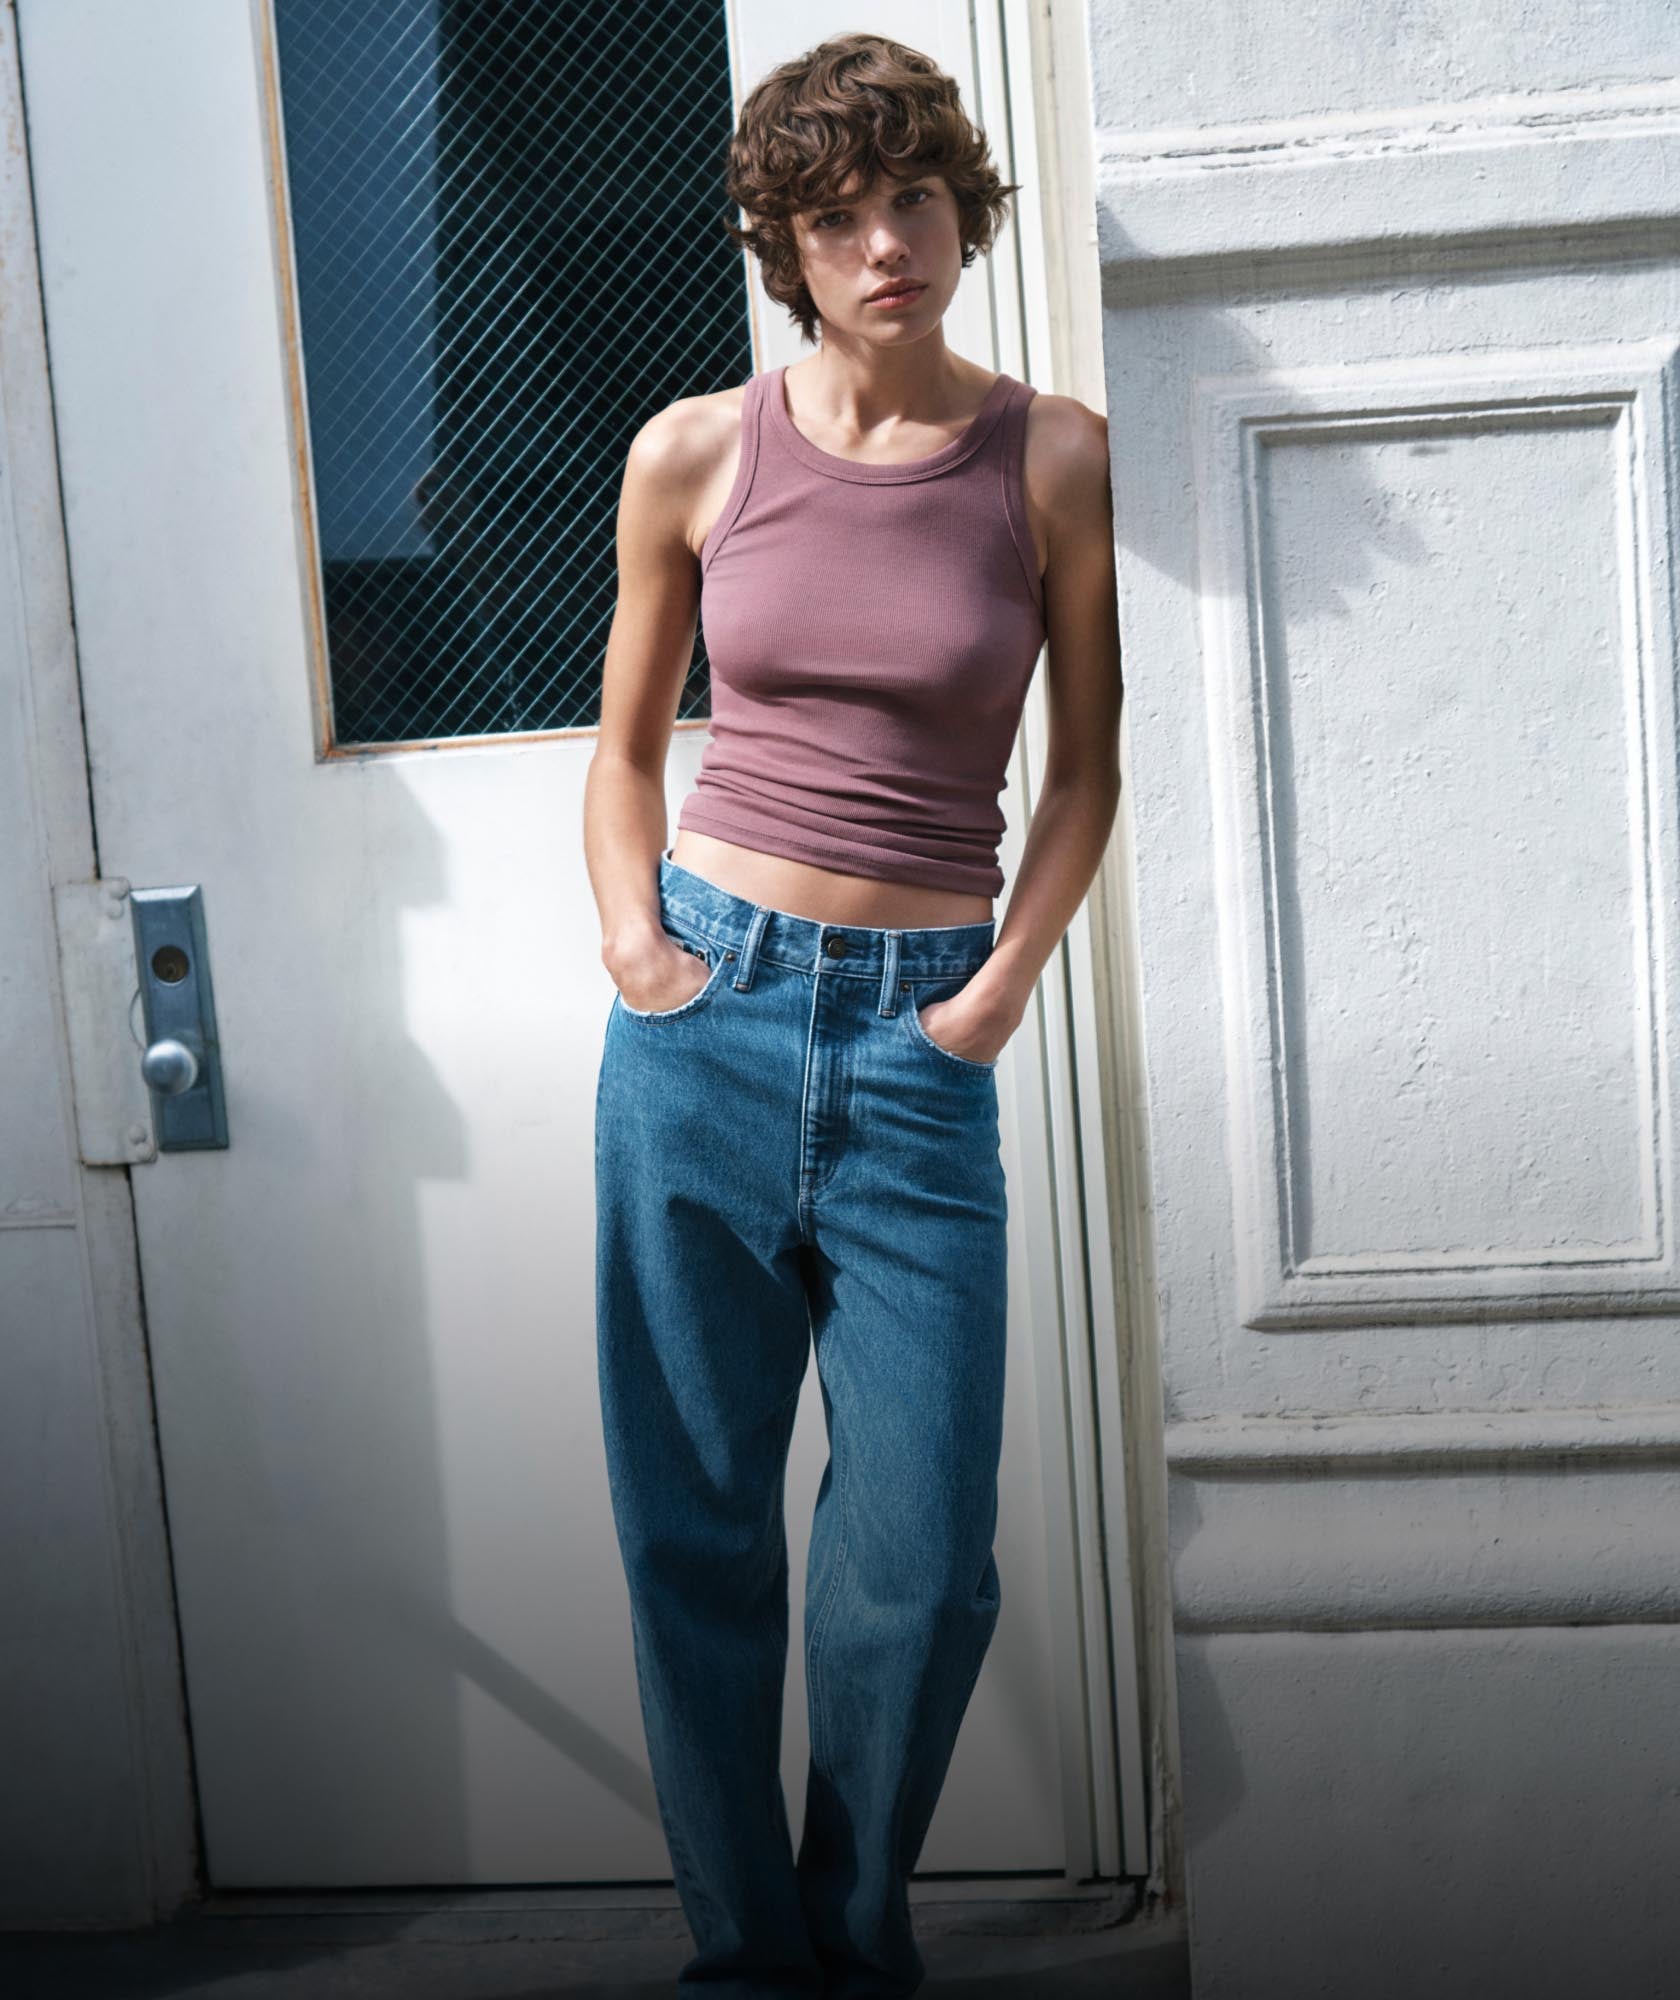 Woman posing with her arms raised wearing a white t-shirt and light blue relaxed denim jeans